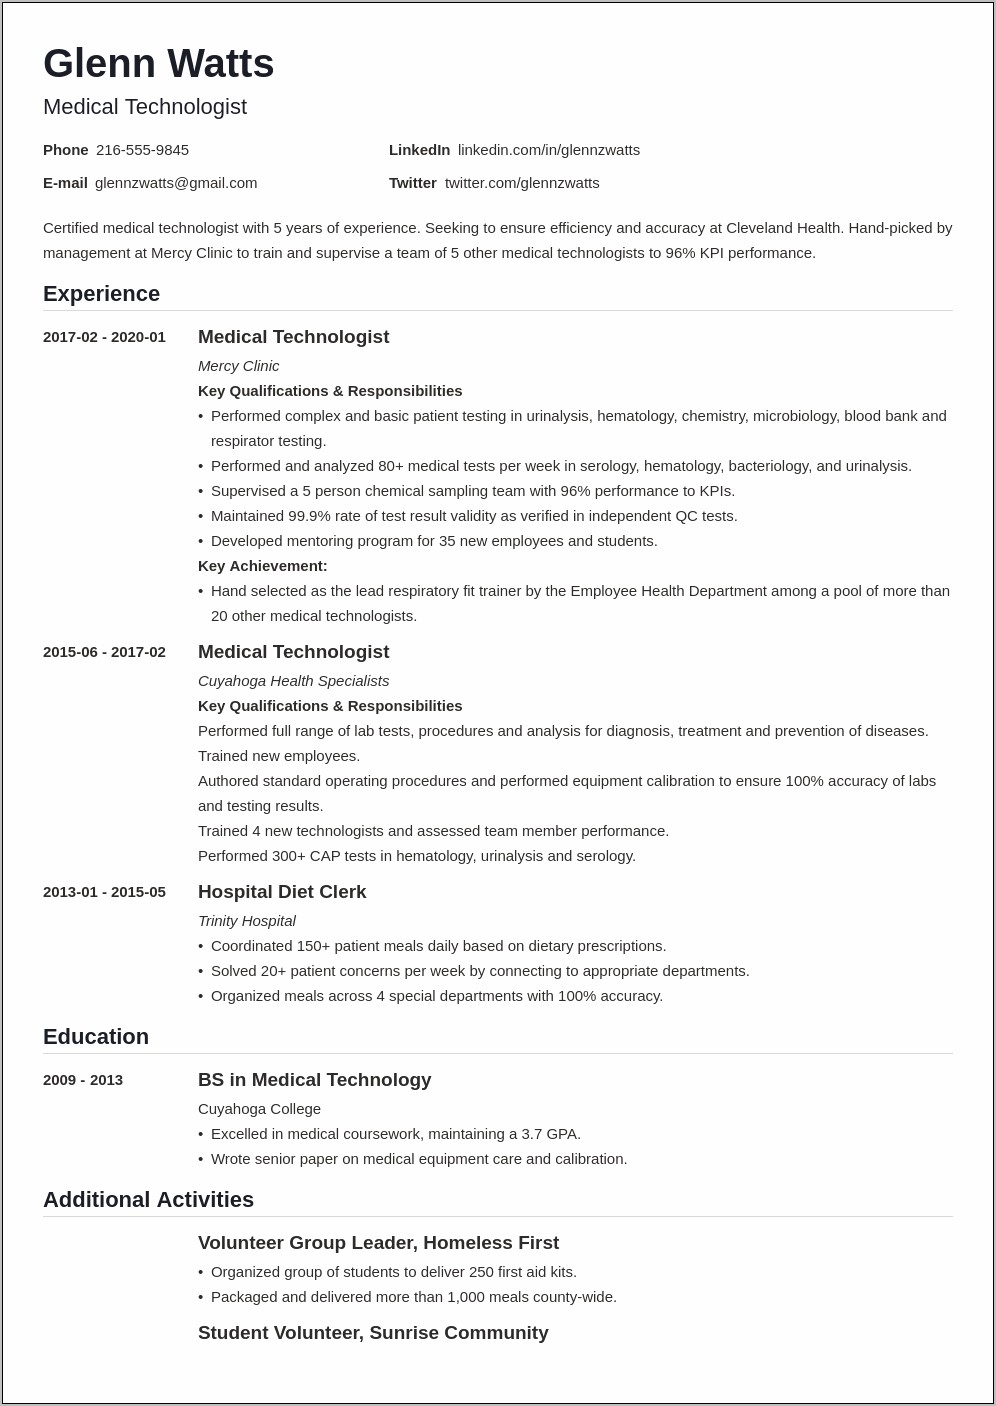 Resume Objective For Technology Specialist